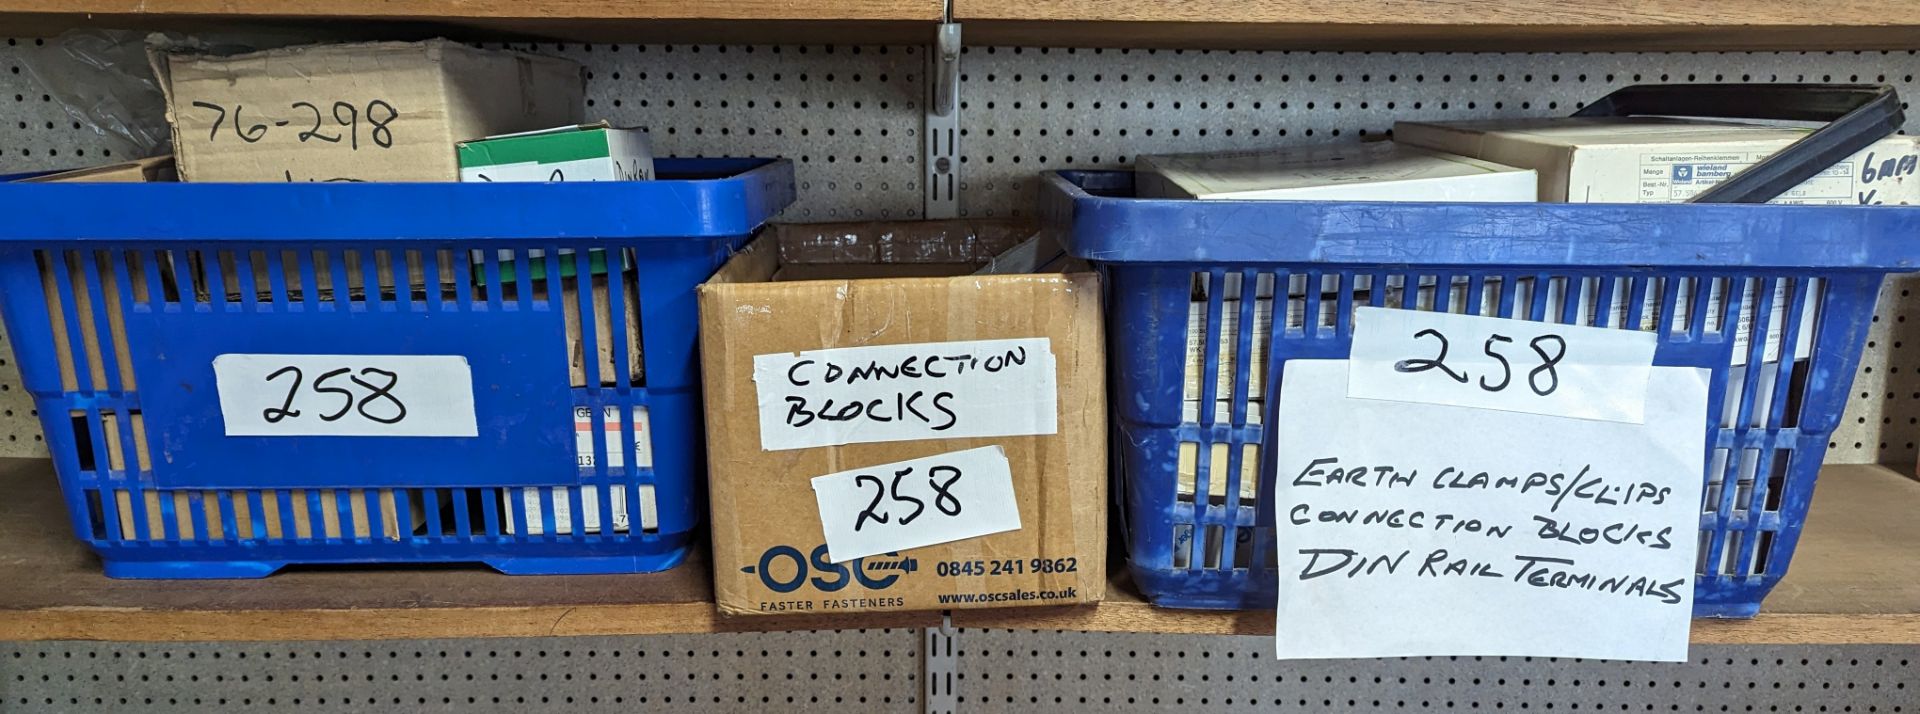 EARTH CLAMPS/ CLIPS/ CONNECTION BLOCK/ DIN RAIL TERMINALS (saleroom location: Frank Eastwood & Co